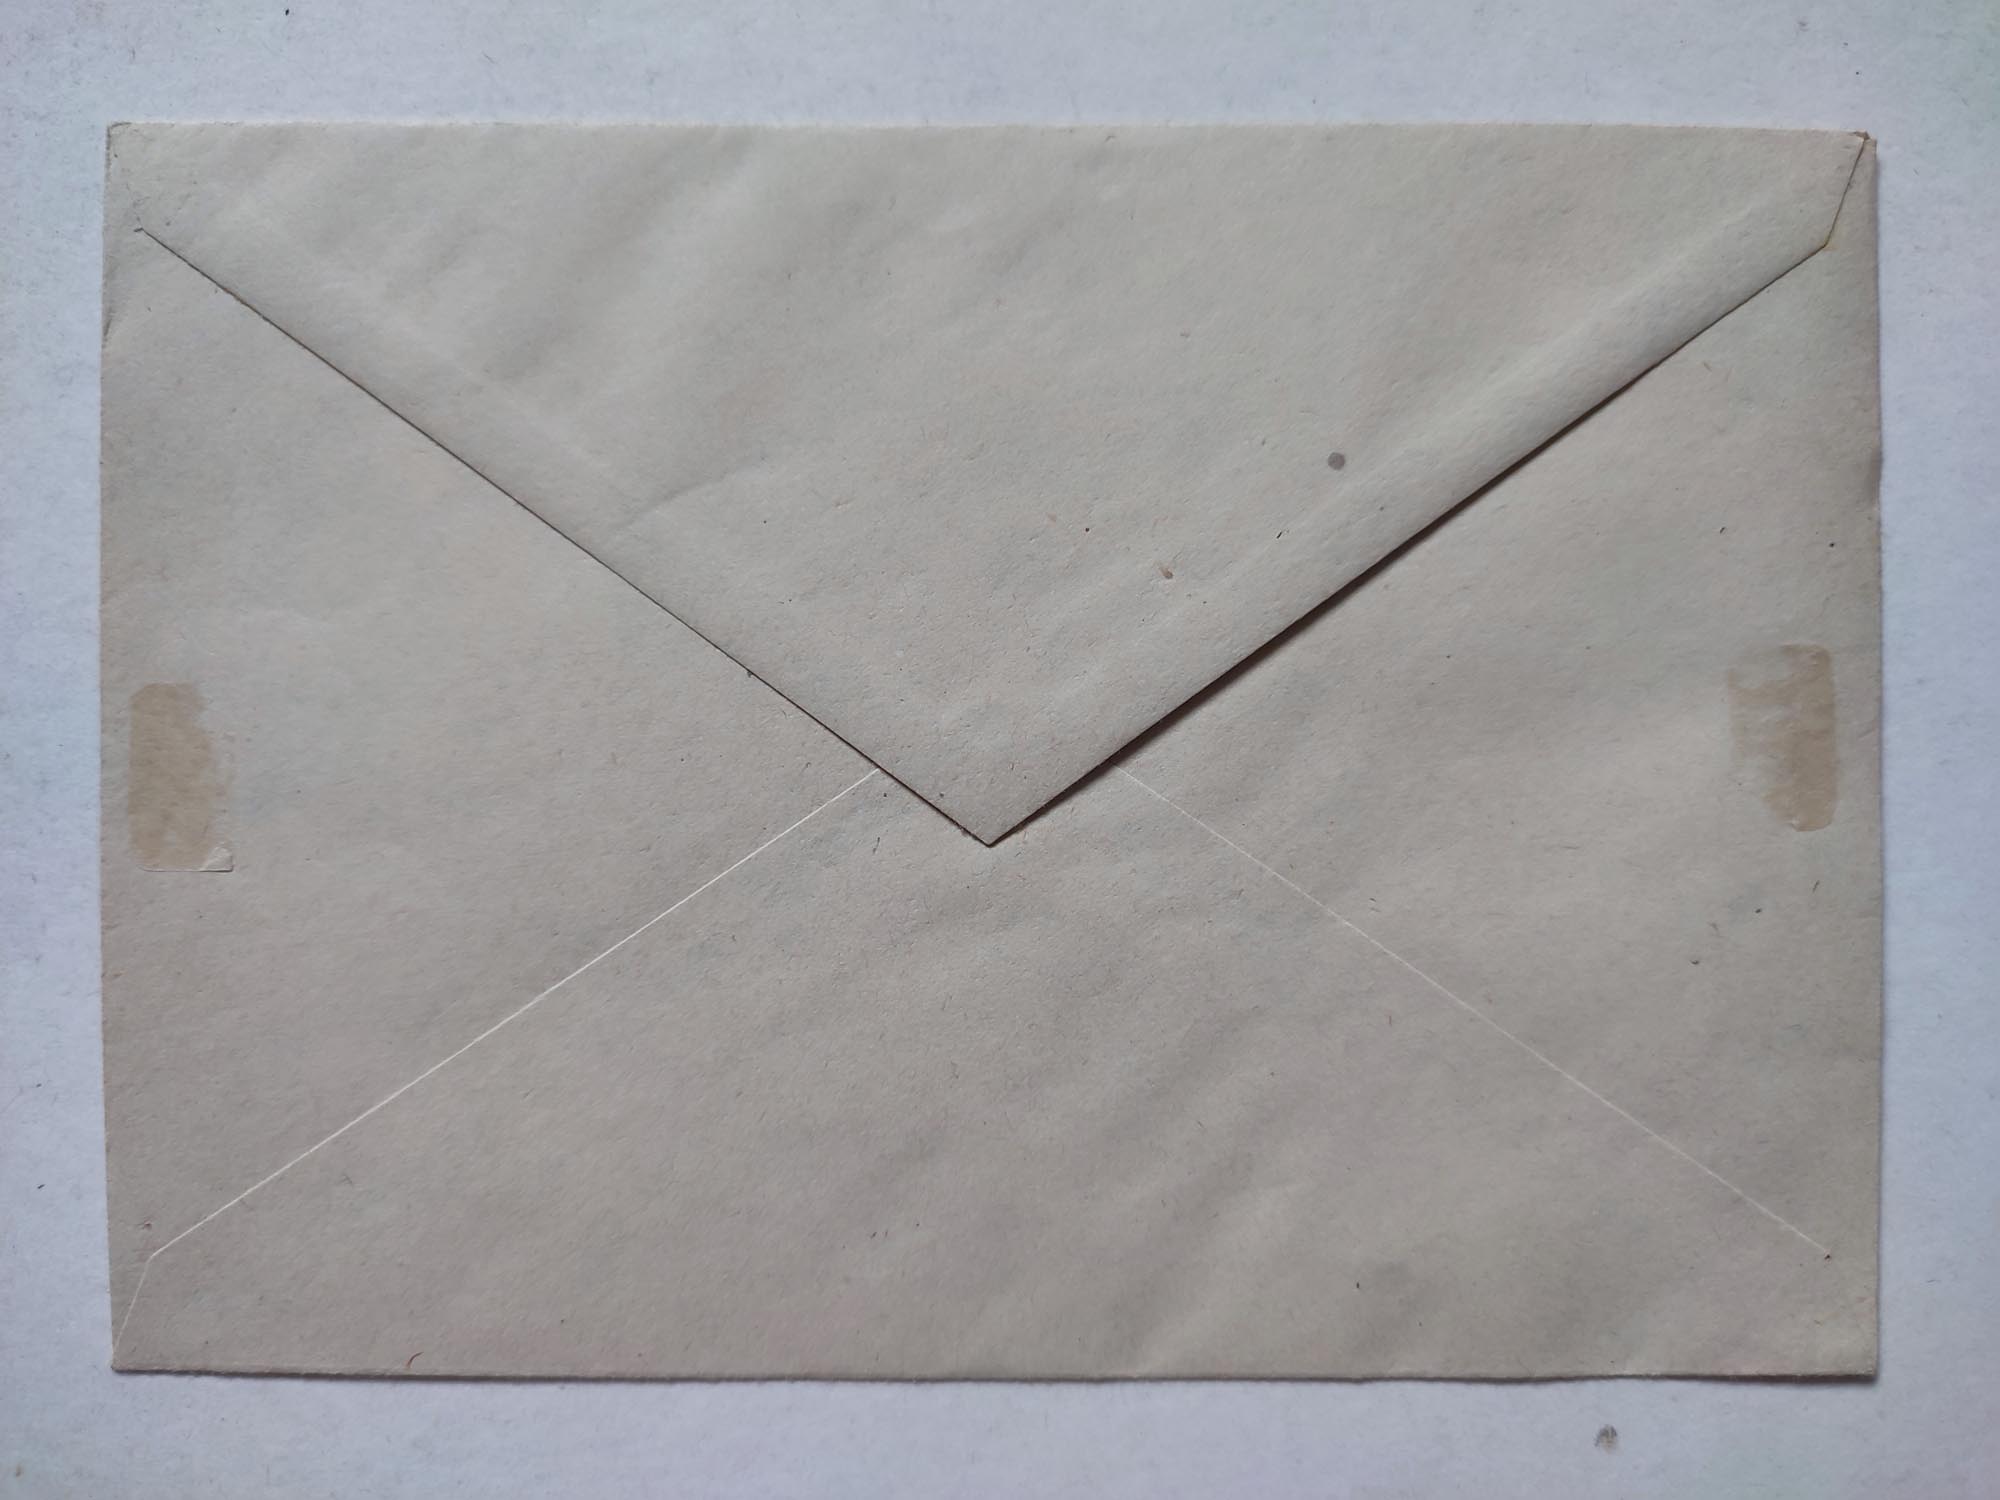 Envelope with the Beer Hall Putsch stamps dated 4.4.44